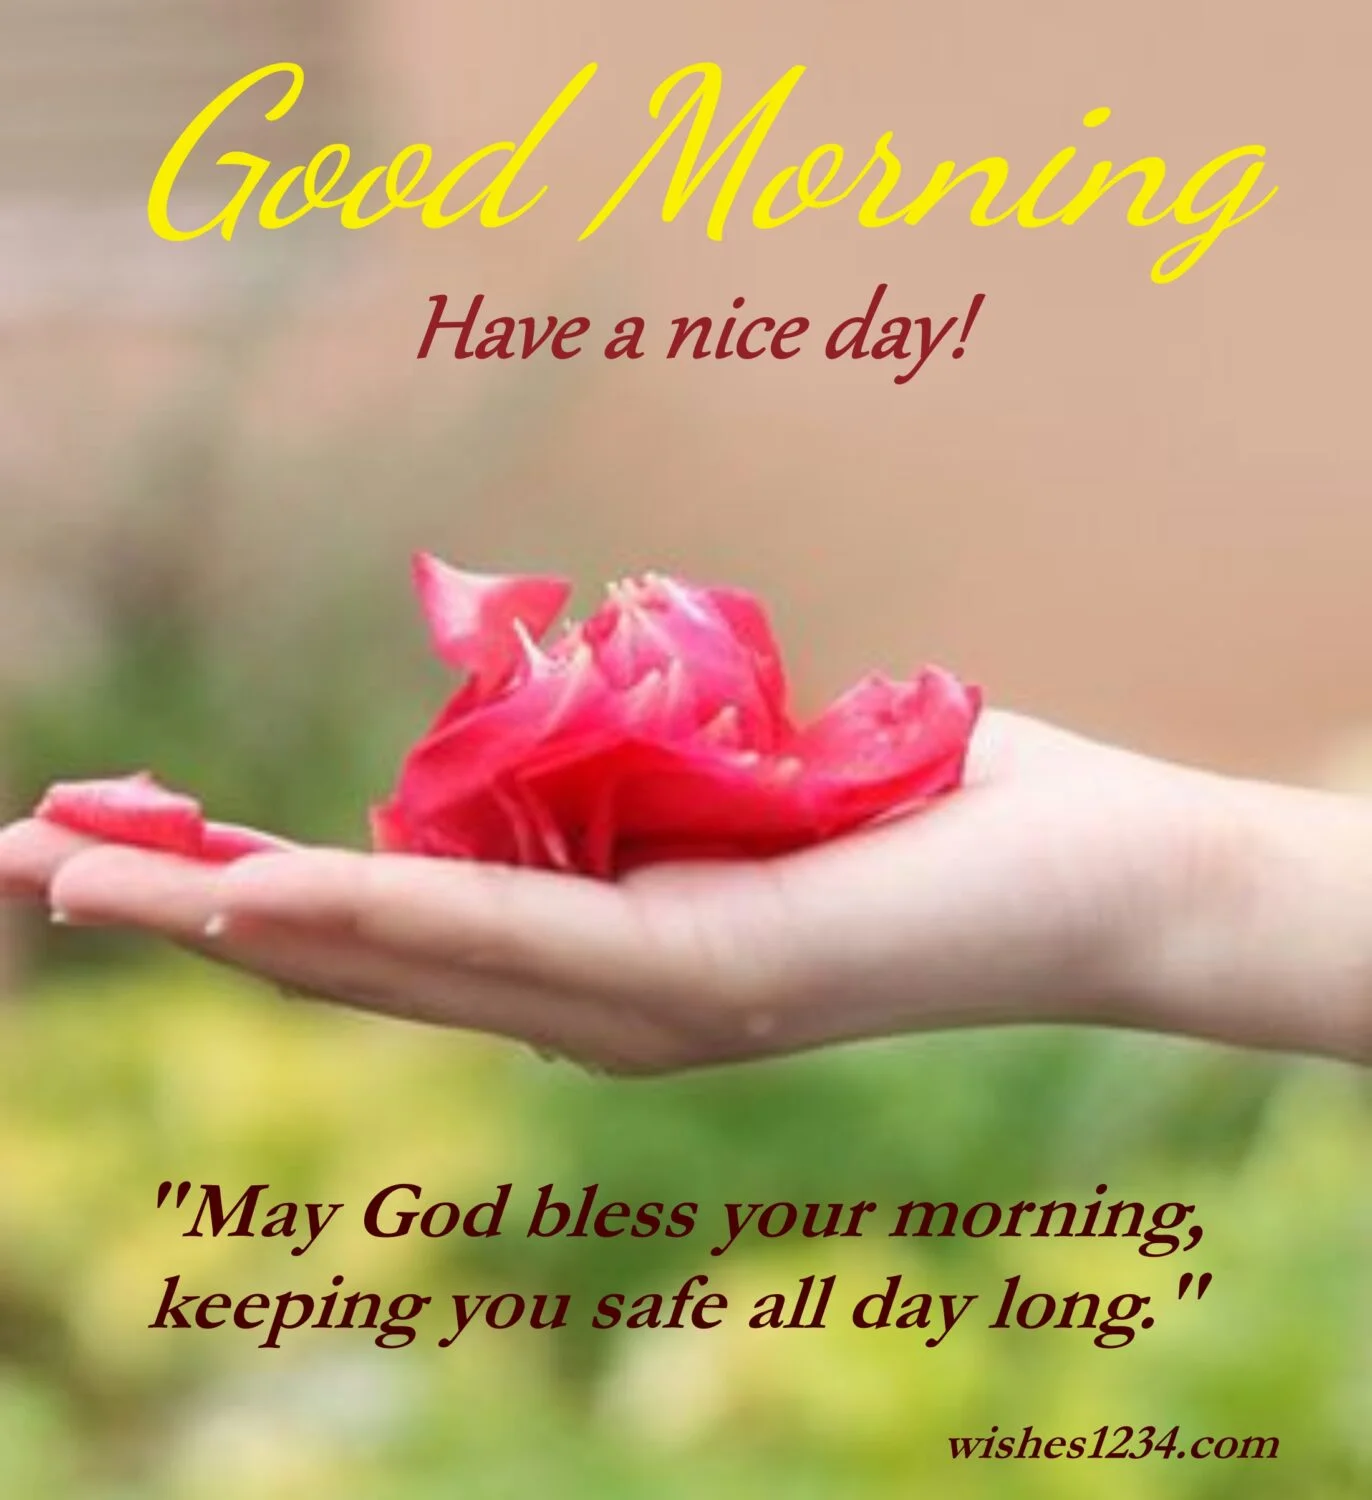 Rose petals in palm, Good Morning Message | Good Morning Images.